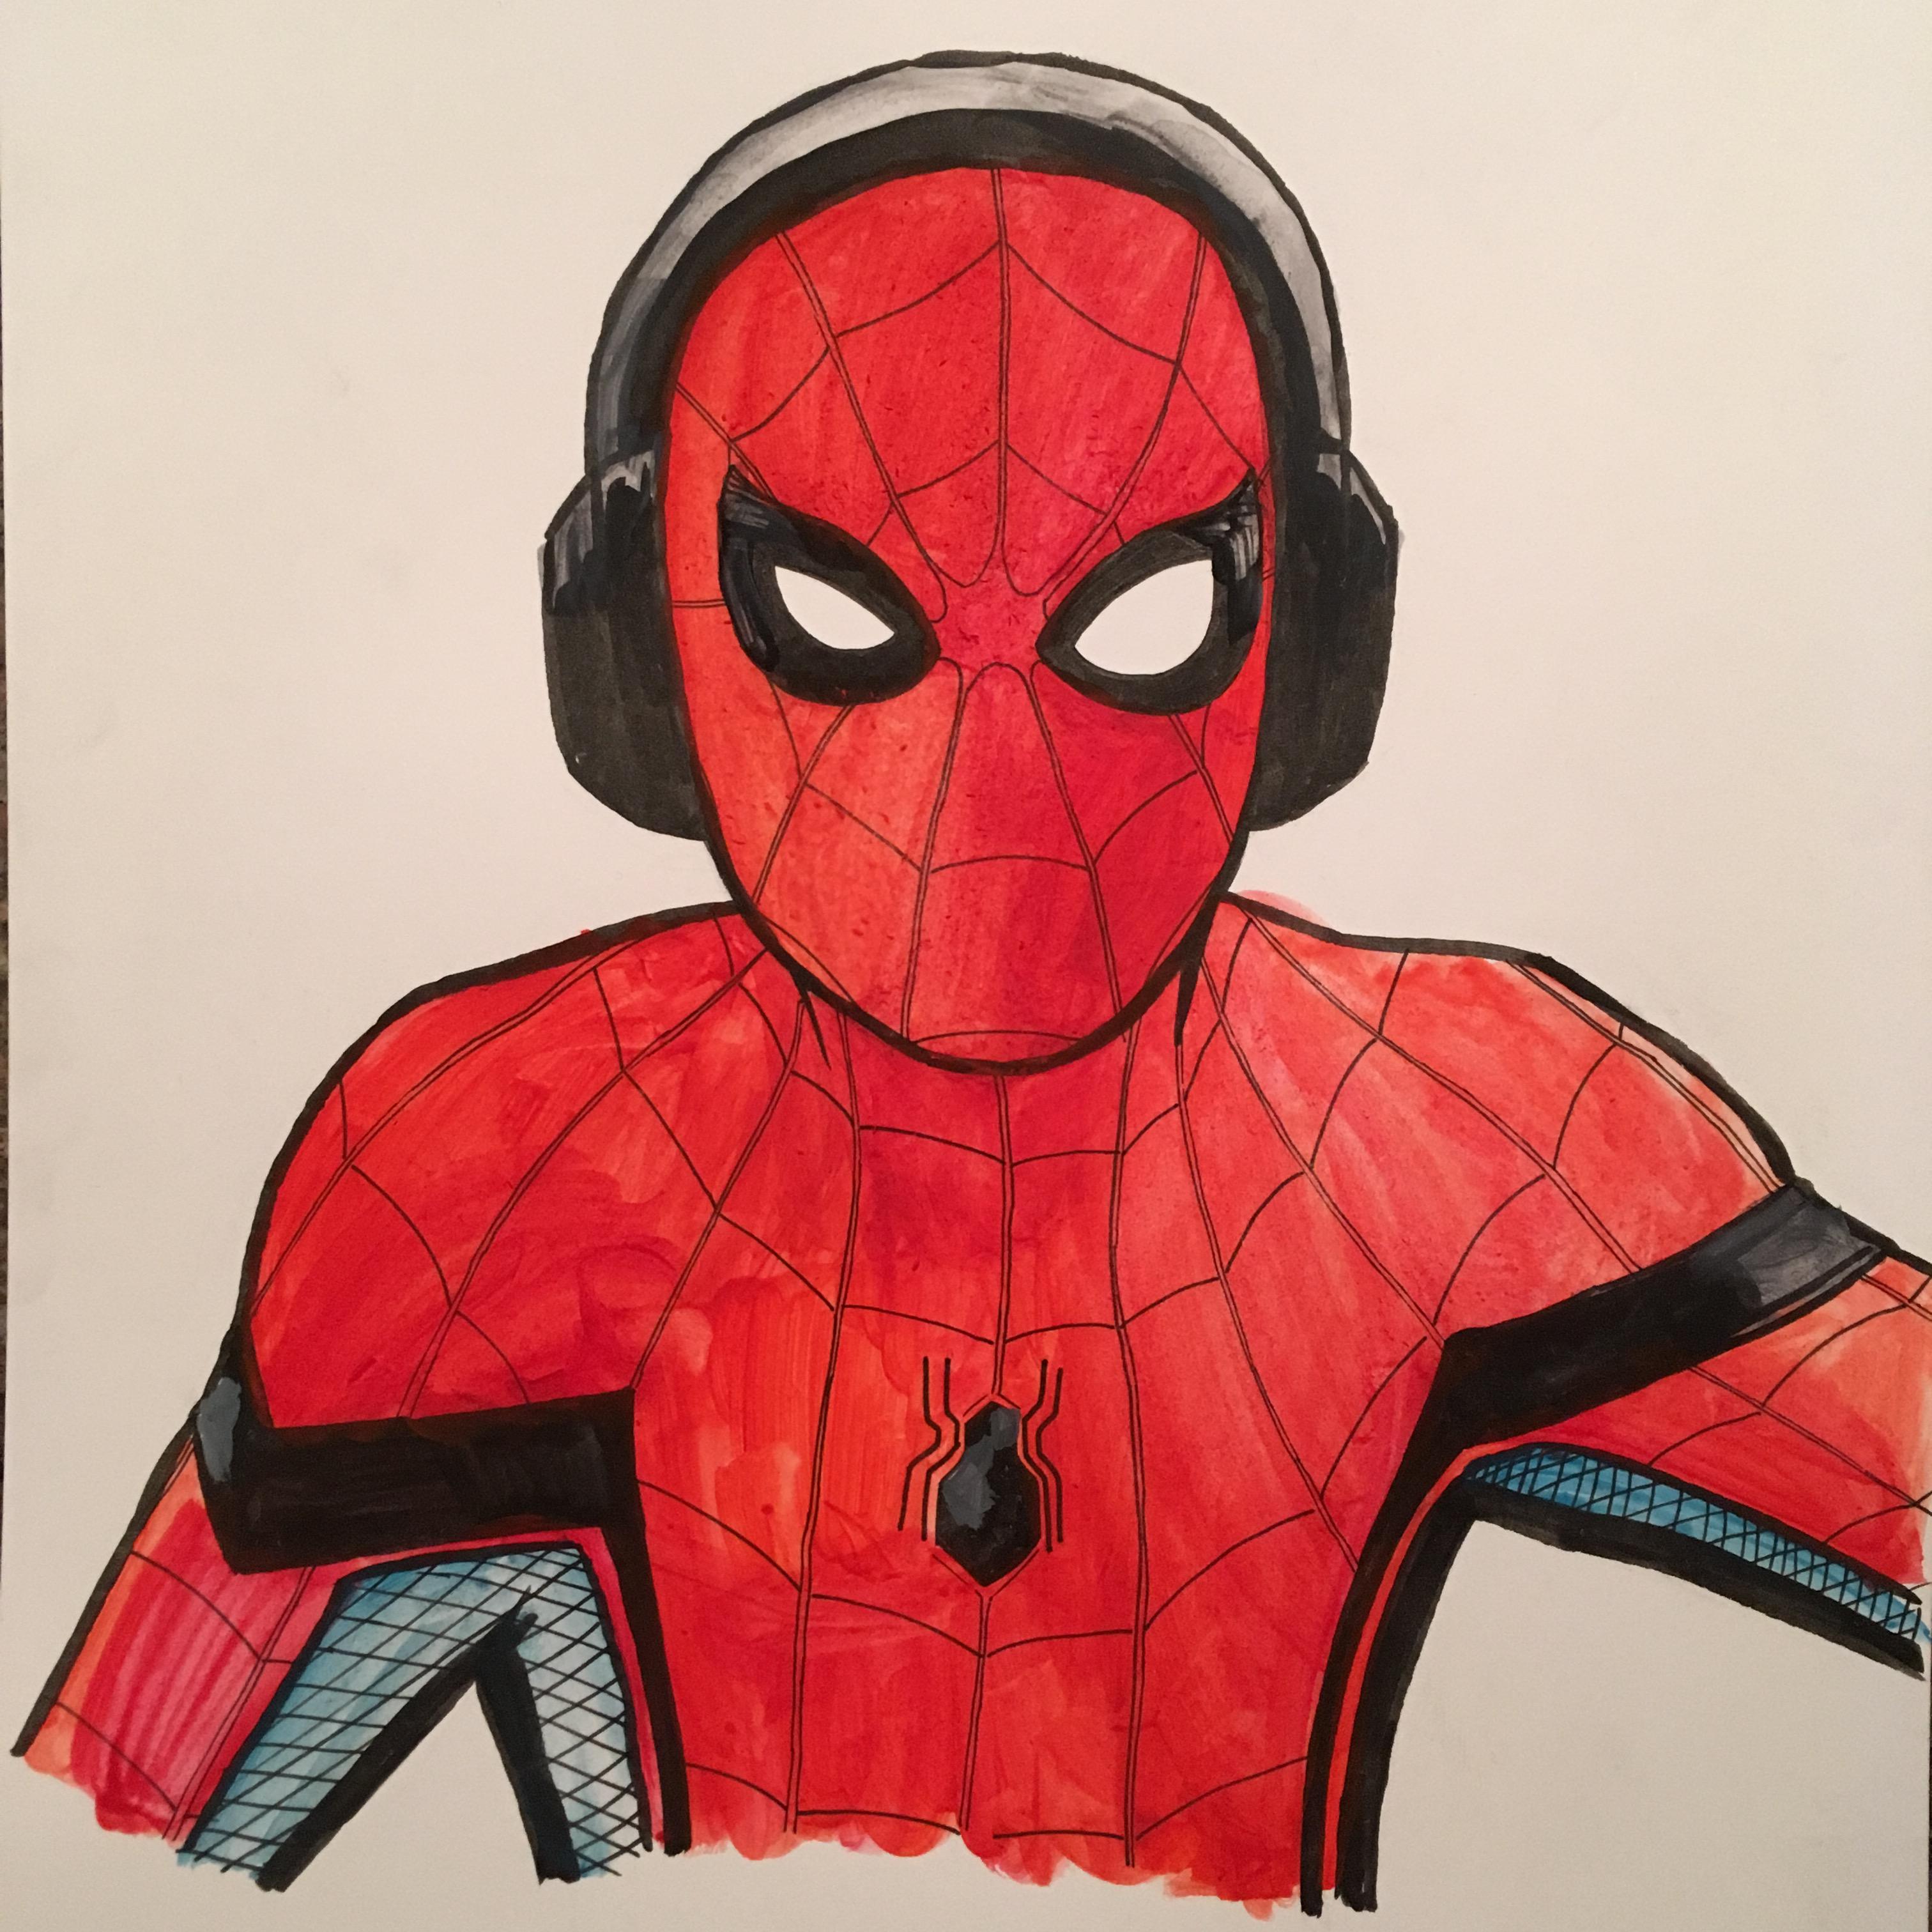 Easy Spiderman Drawing Follow the simple instructions and in